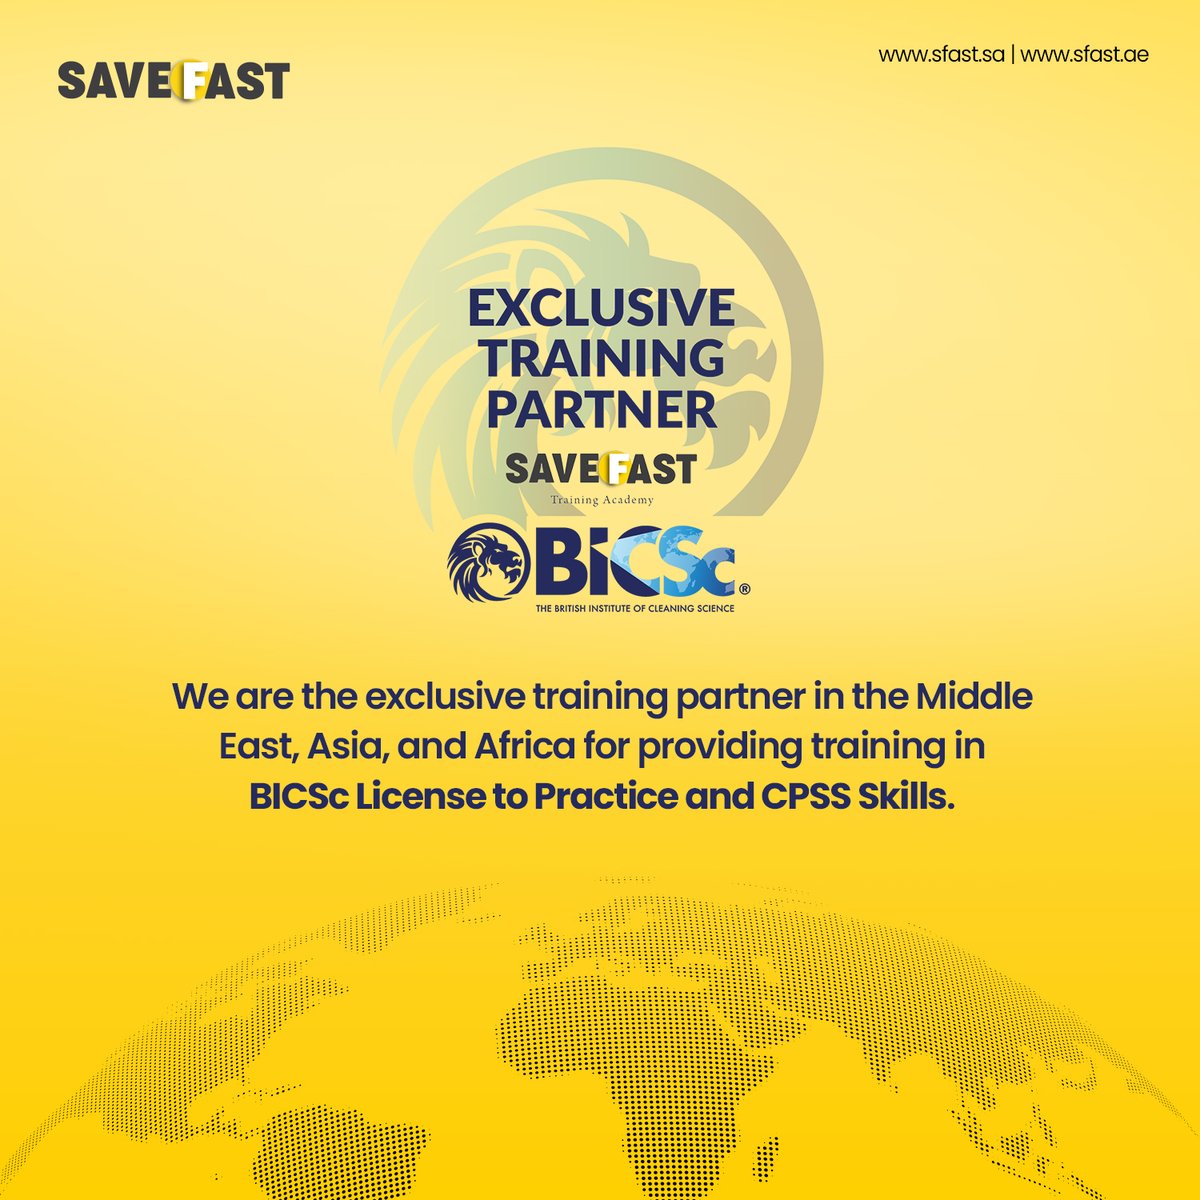 SaveFast is very proud to be @BICSc_UK exclusive partner for face-to-face training delivery across the IMEA and Asia regions. We have already opened state-of-the-art BICSc training centres in Saudi Arabia,The UAE and India